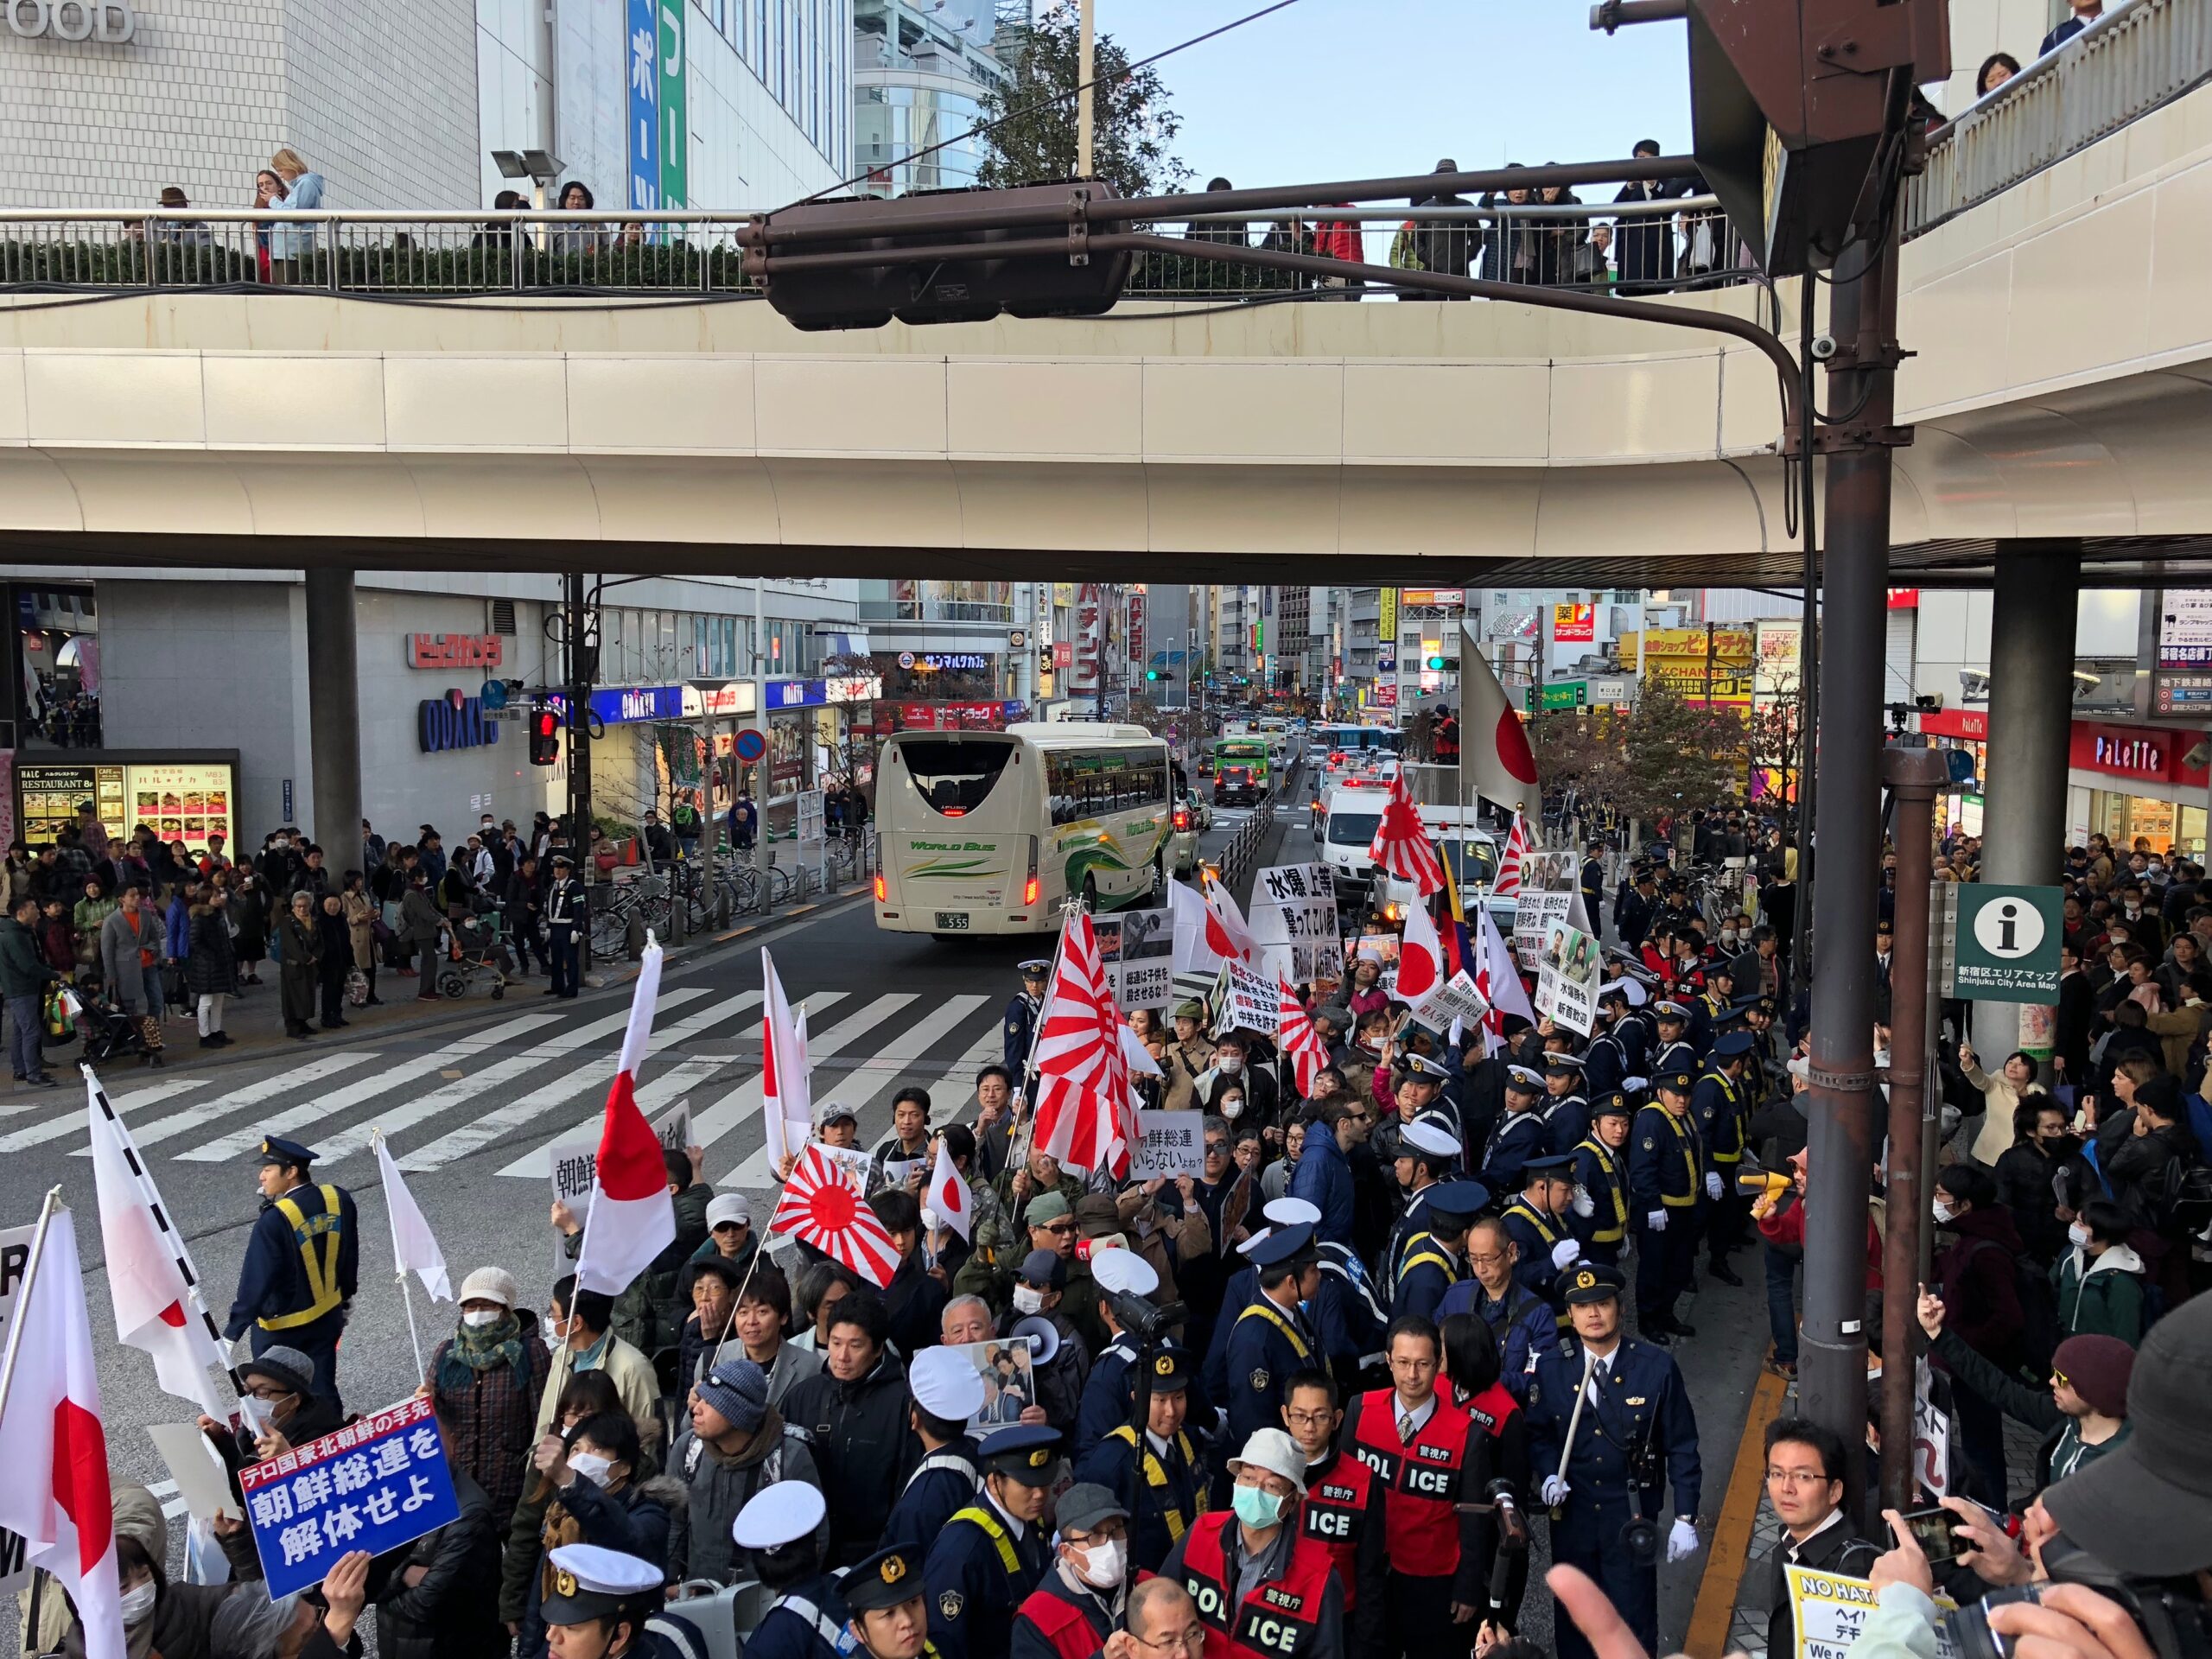 Right-wing protesters are gathered in the streets of Tokyo, flying the Japanese national flags as well as the Rising Sun Flags, which show red rays surrounding a red circle in the center, symbolizing the Sun. The latter design was adopted by the Imperial Japanese Army as a war flag during the World War II. Because it evokes Japanese war crimes, the design is controversial in Japan’s former colonies as well as for Allied WWII veterans.